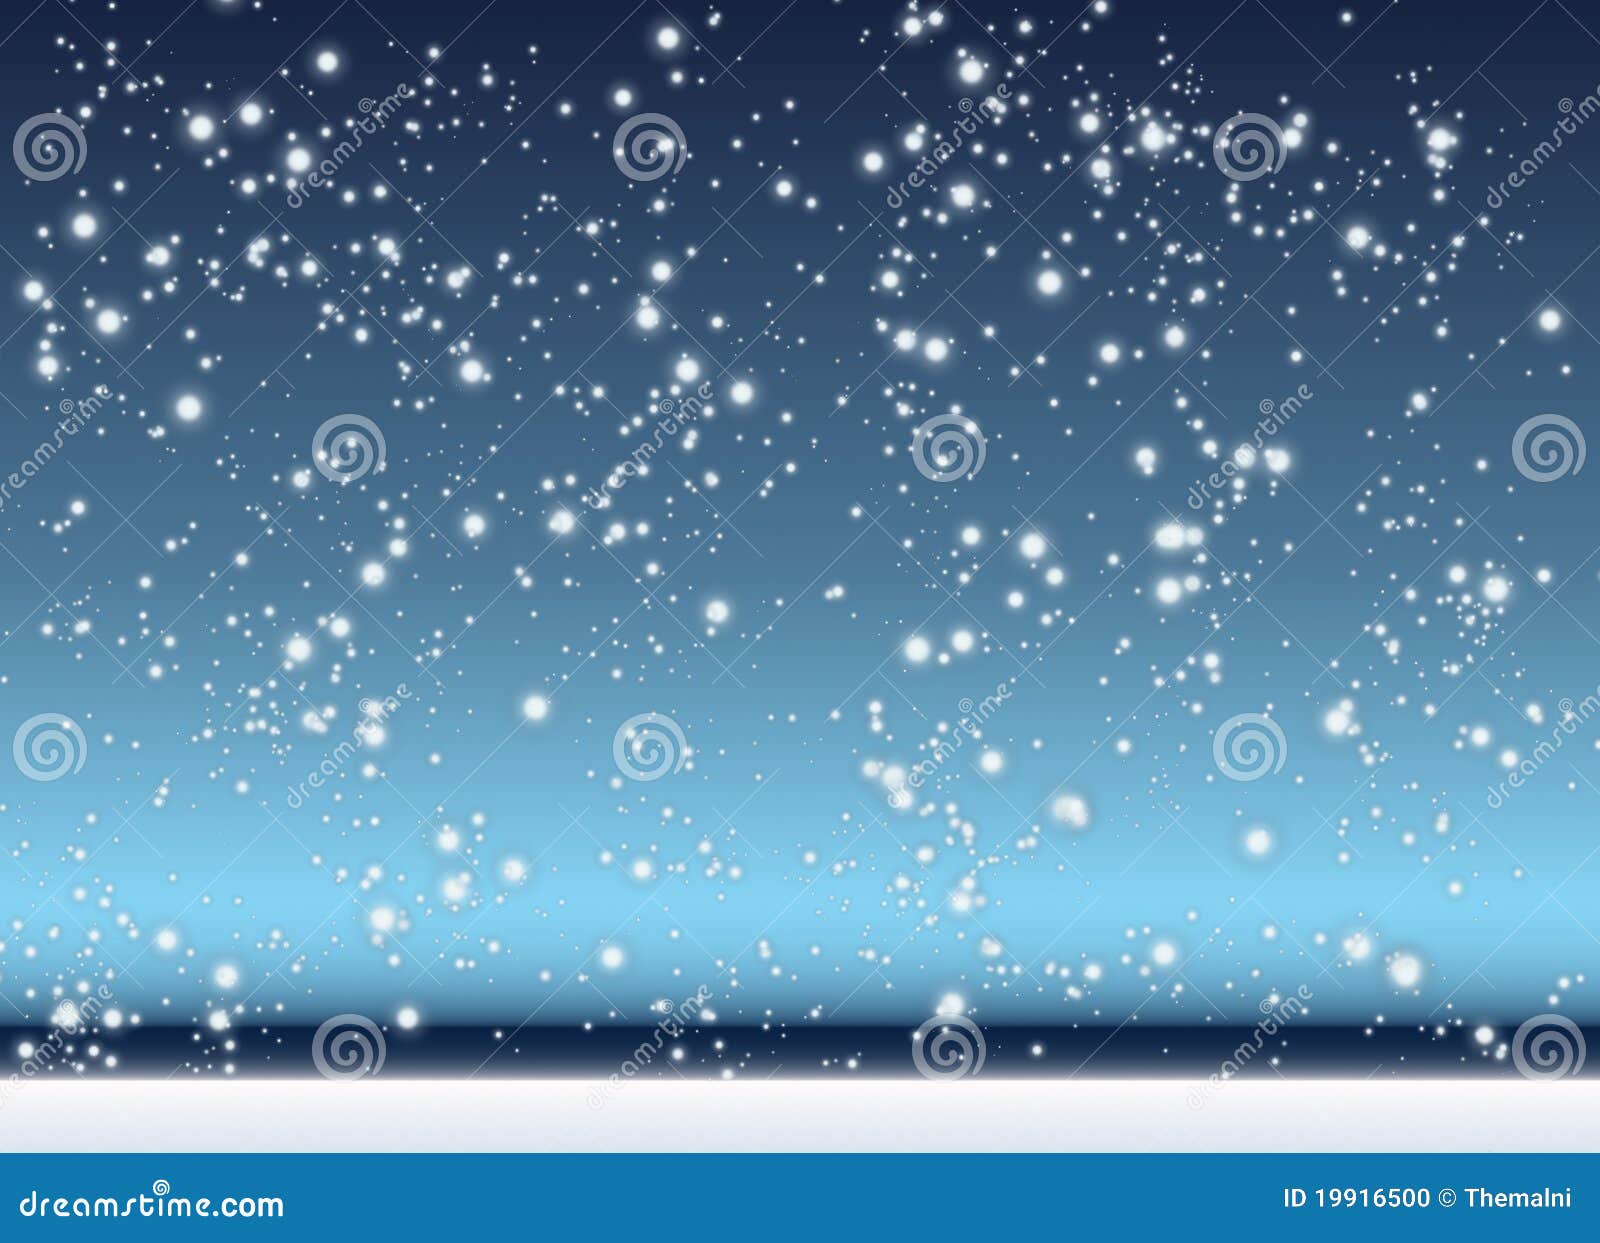 clipart of snow falling - photo #31